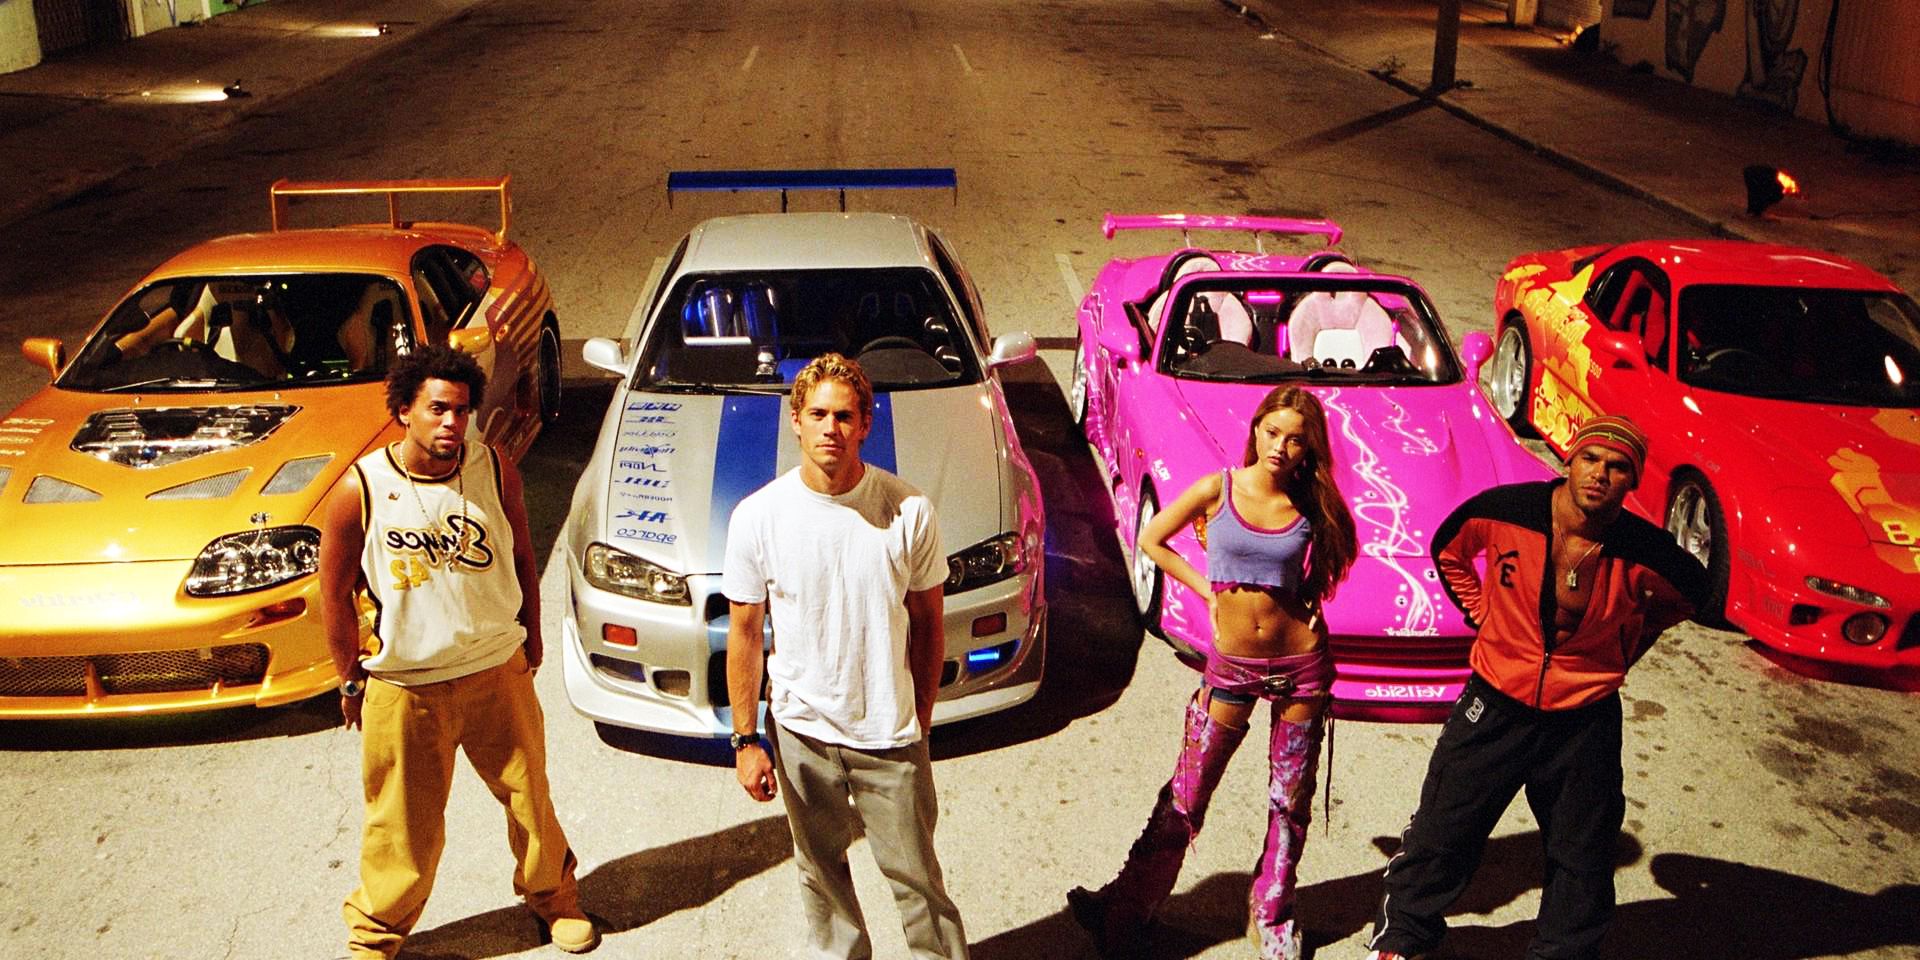 what car did brian drive in fast and furious 2